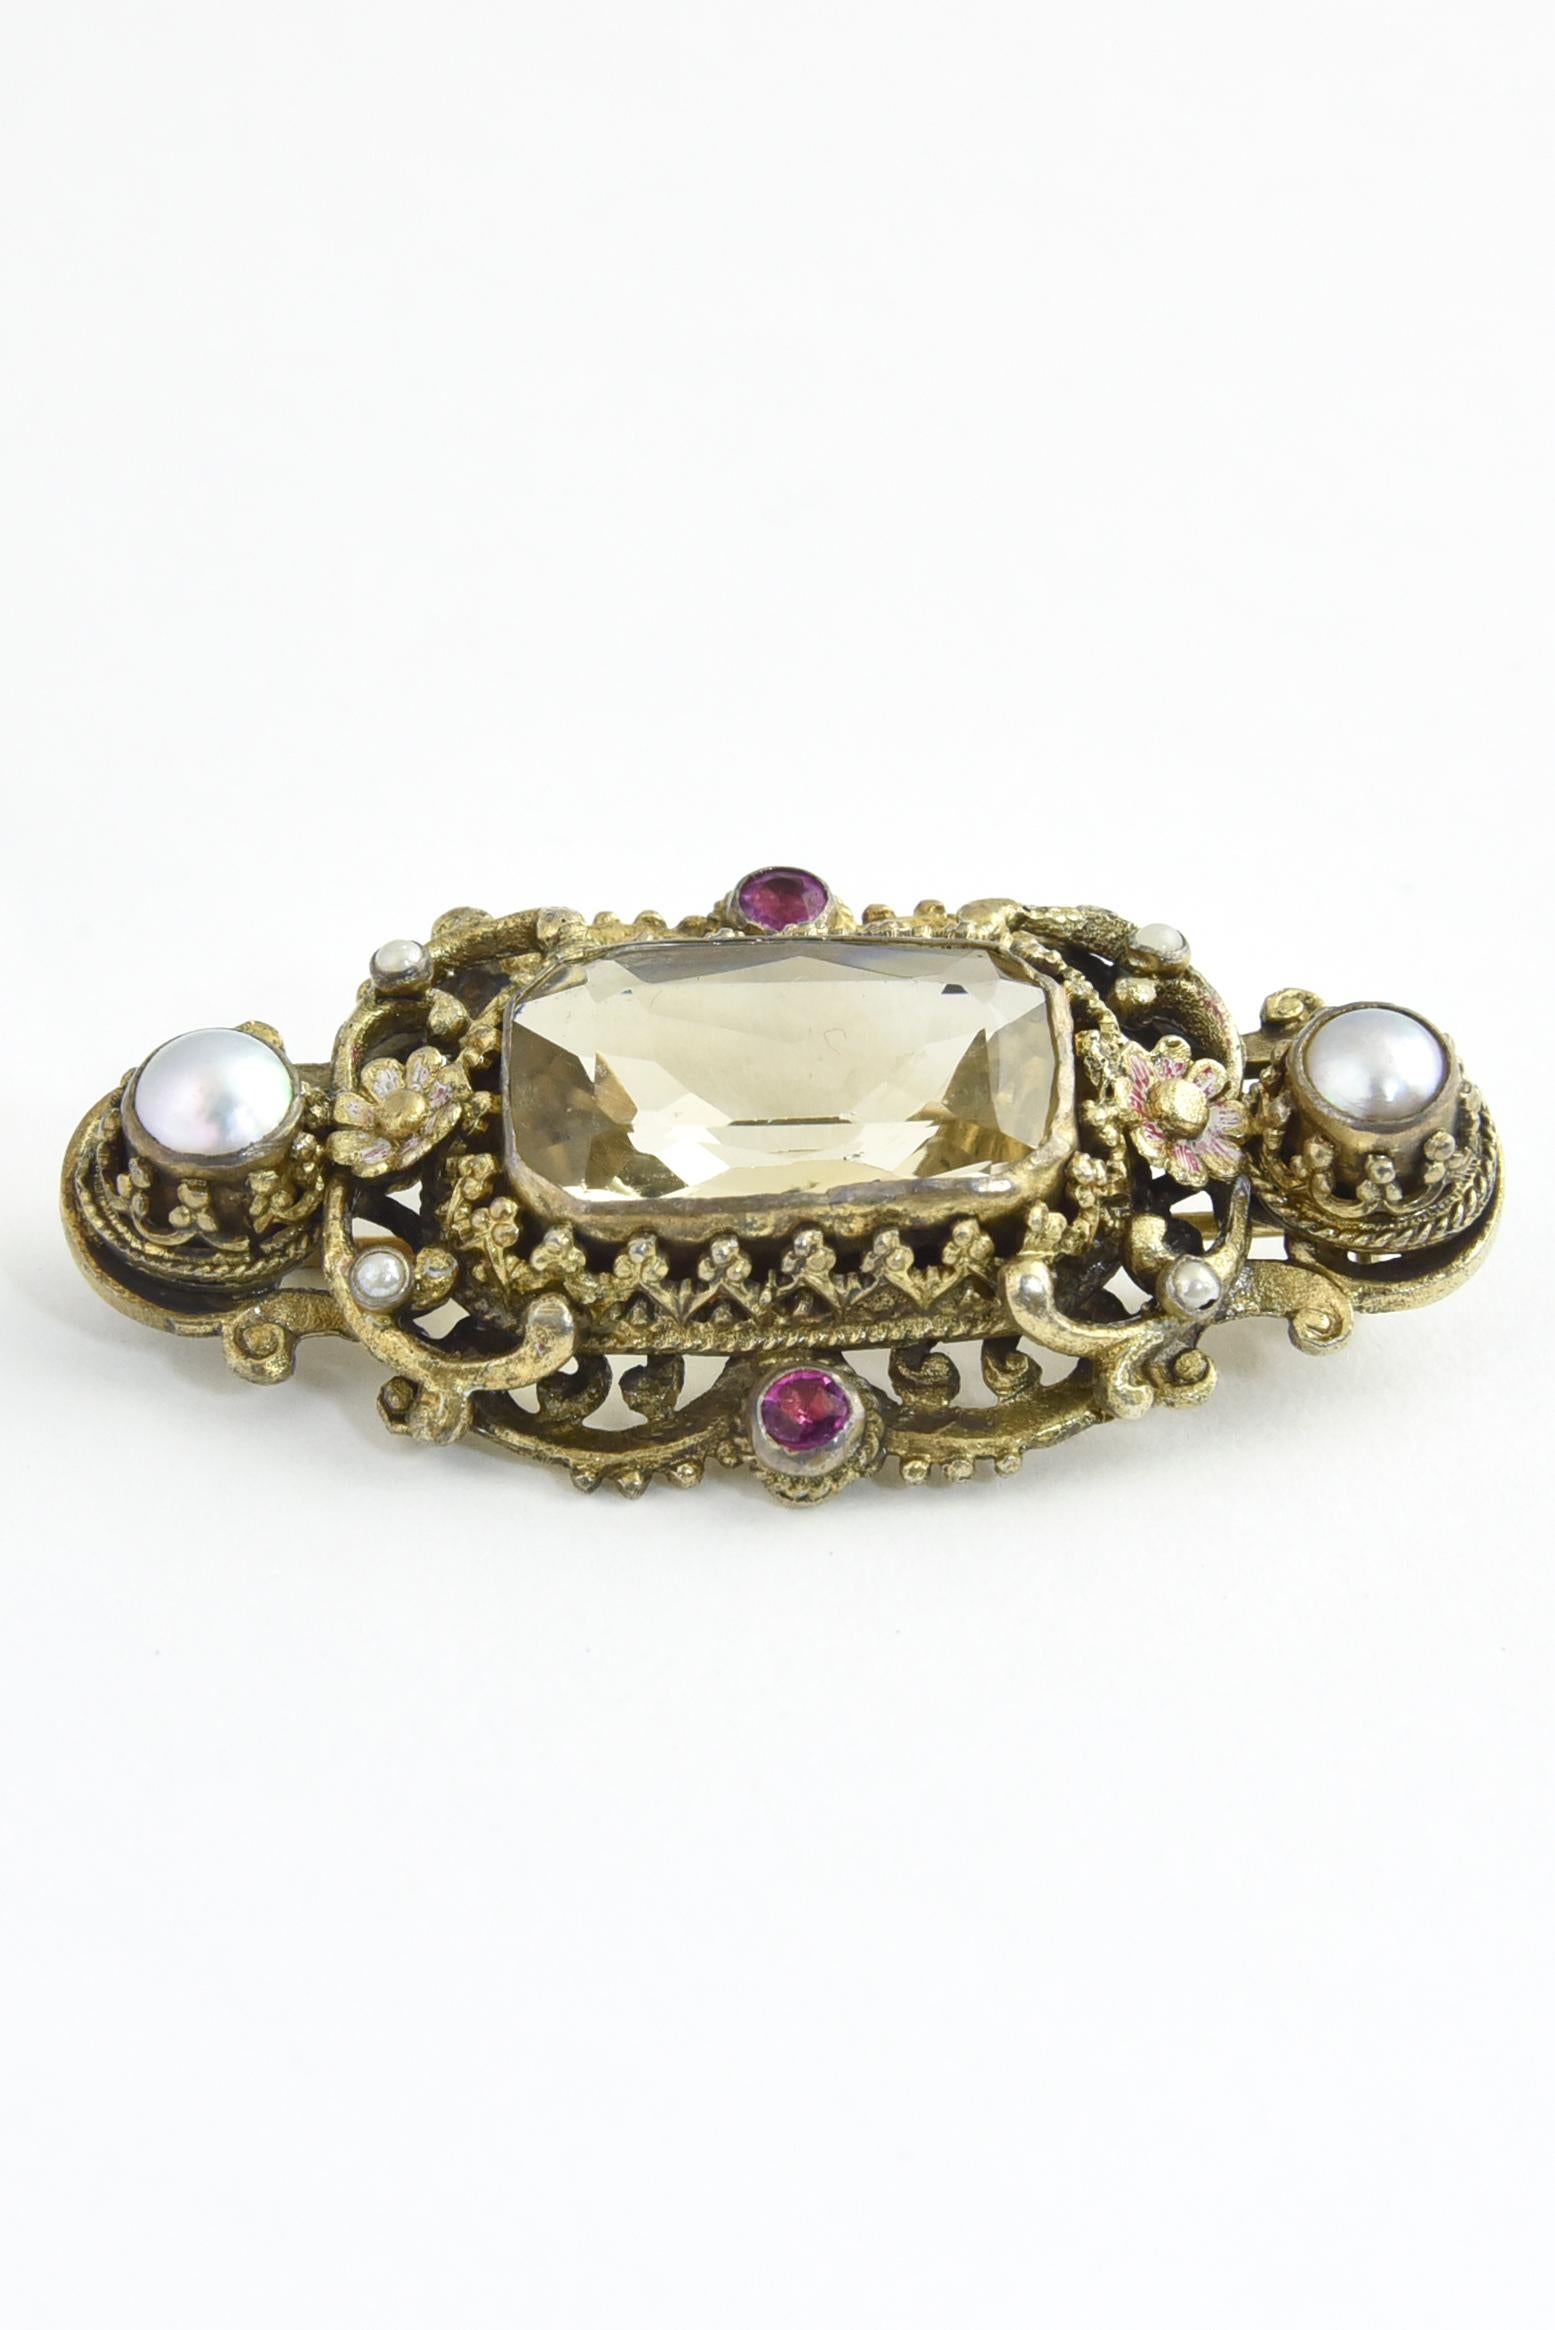 Created between 1860 and 1910 in work shops in Austria-Hungary, this gold gilded 800 silver brooch features a rectangular faceted citrine. The central gem is surrounded by button pearls and pink tourmaline with floral details.